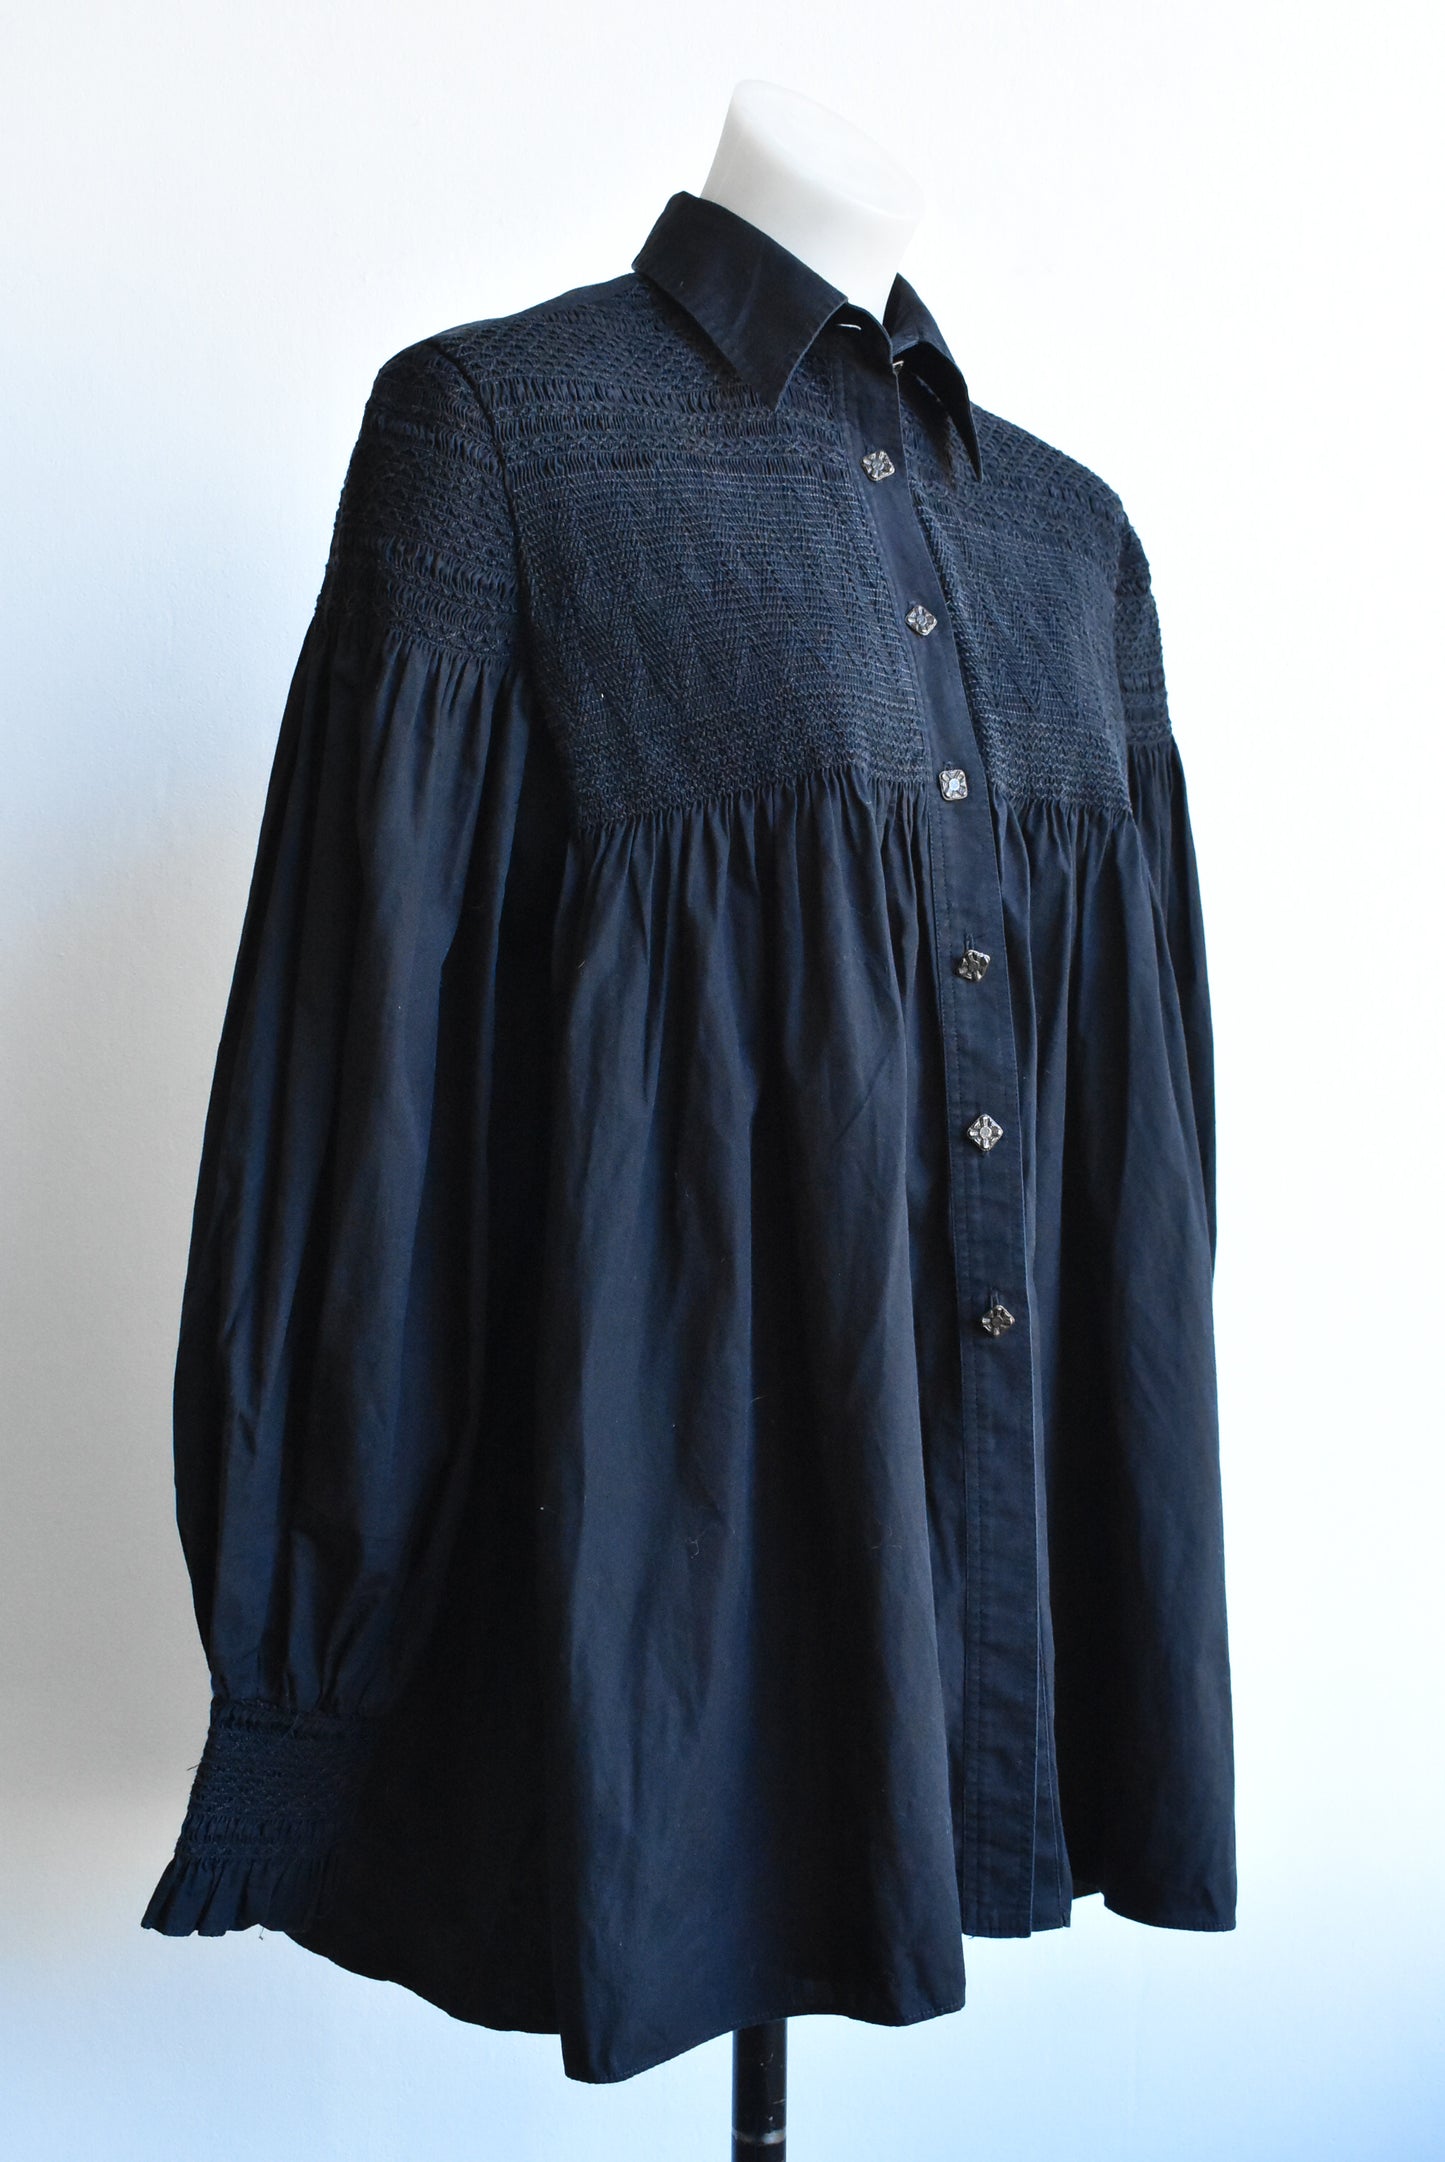 Bazar by Christian Lacroix shirred and gathered shirt, s/m